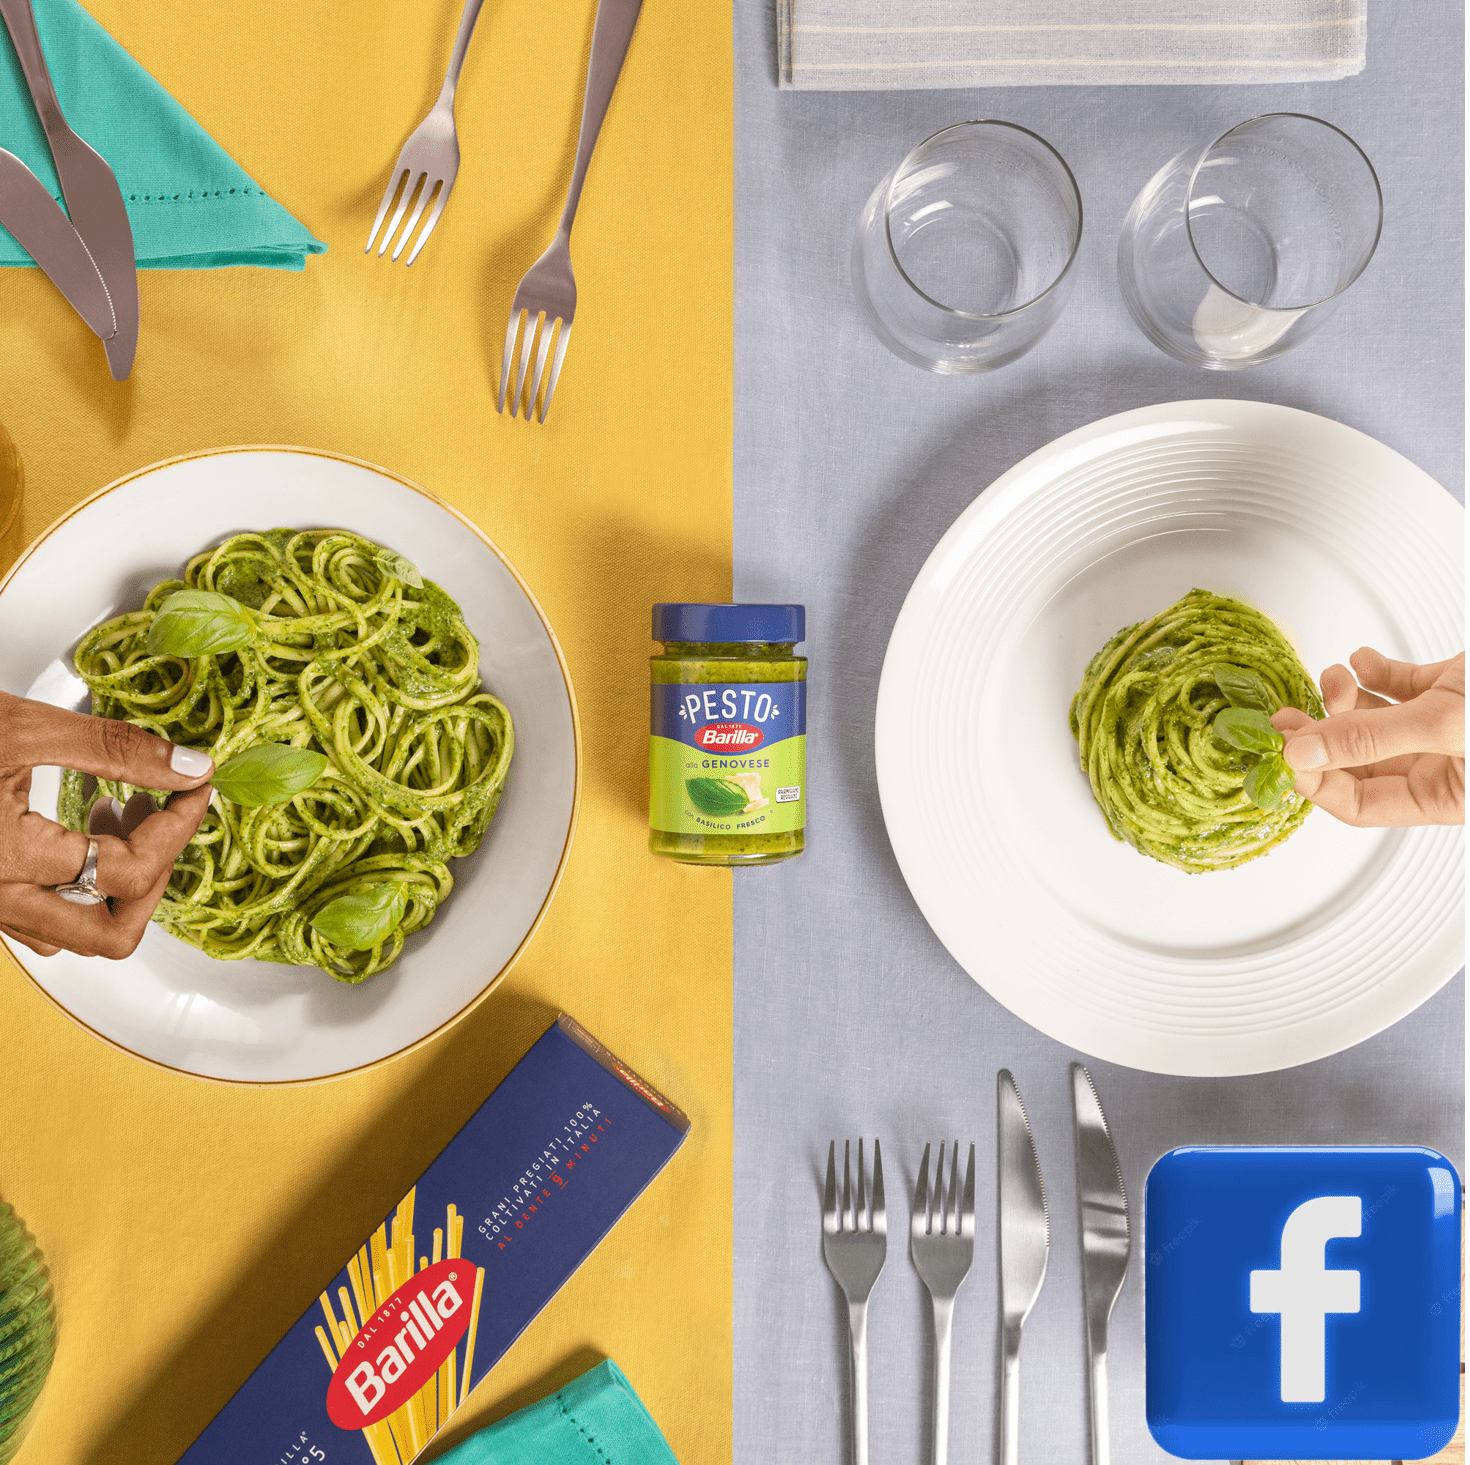 <p>Visit the Facebook home of Barilla! Join us here in celebrating the lifestyle, culture and cuisine of Italy.</p>
<br>
<br>
<br> image